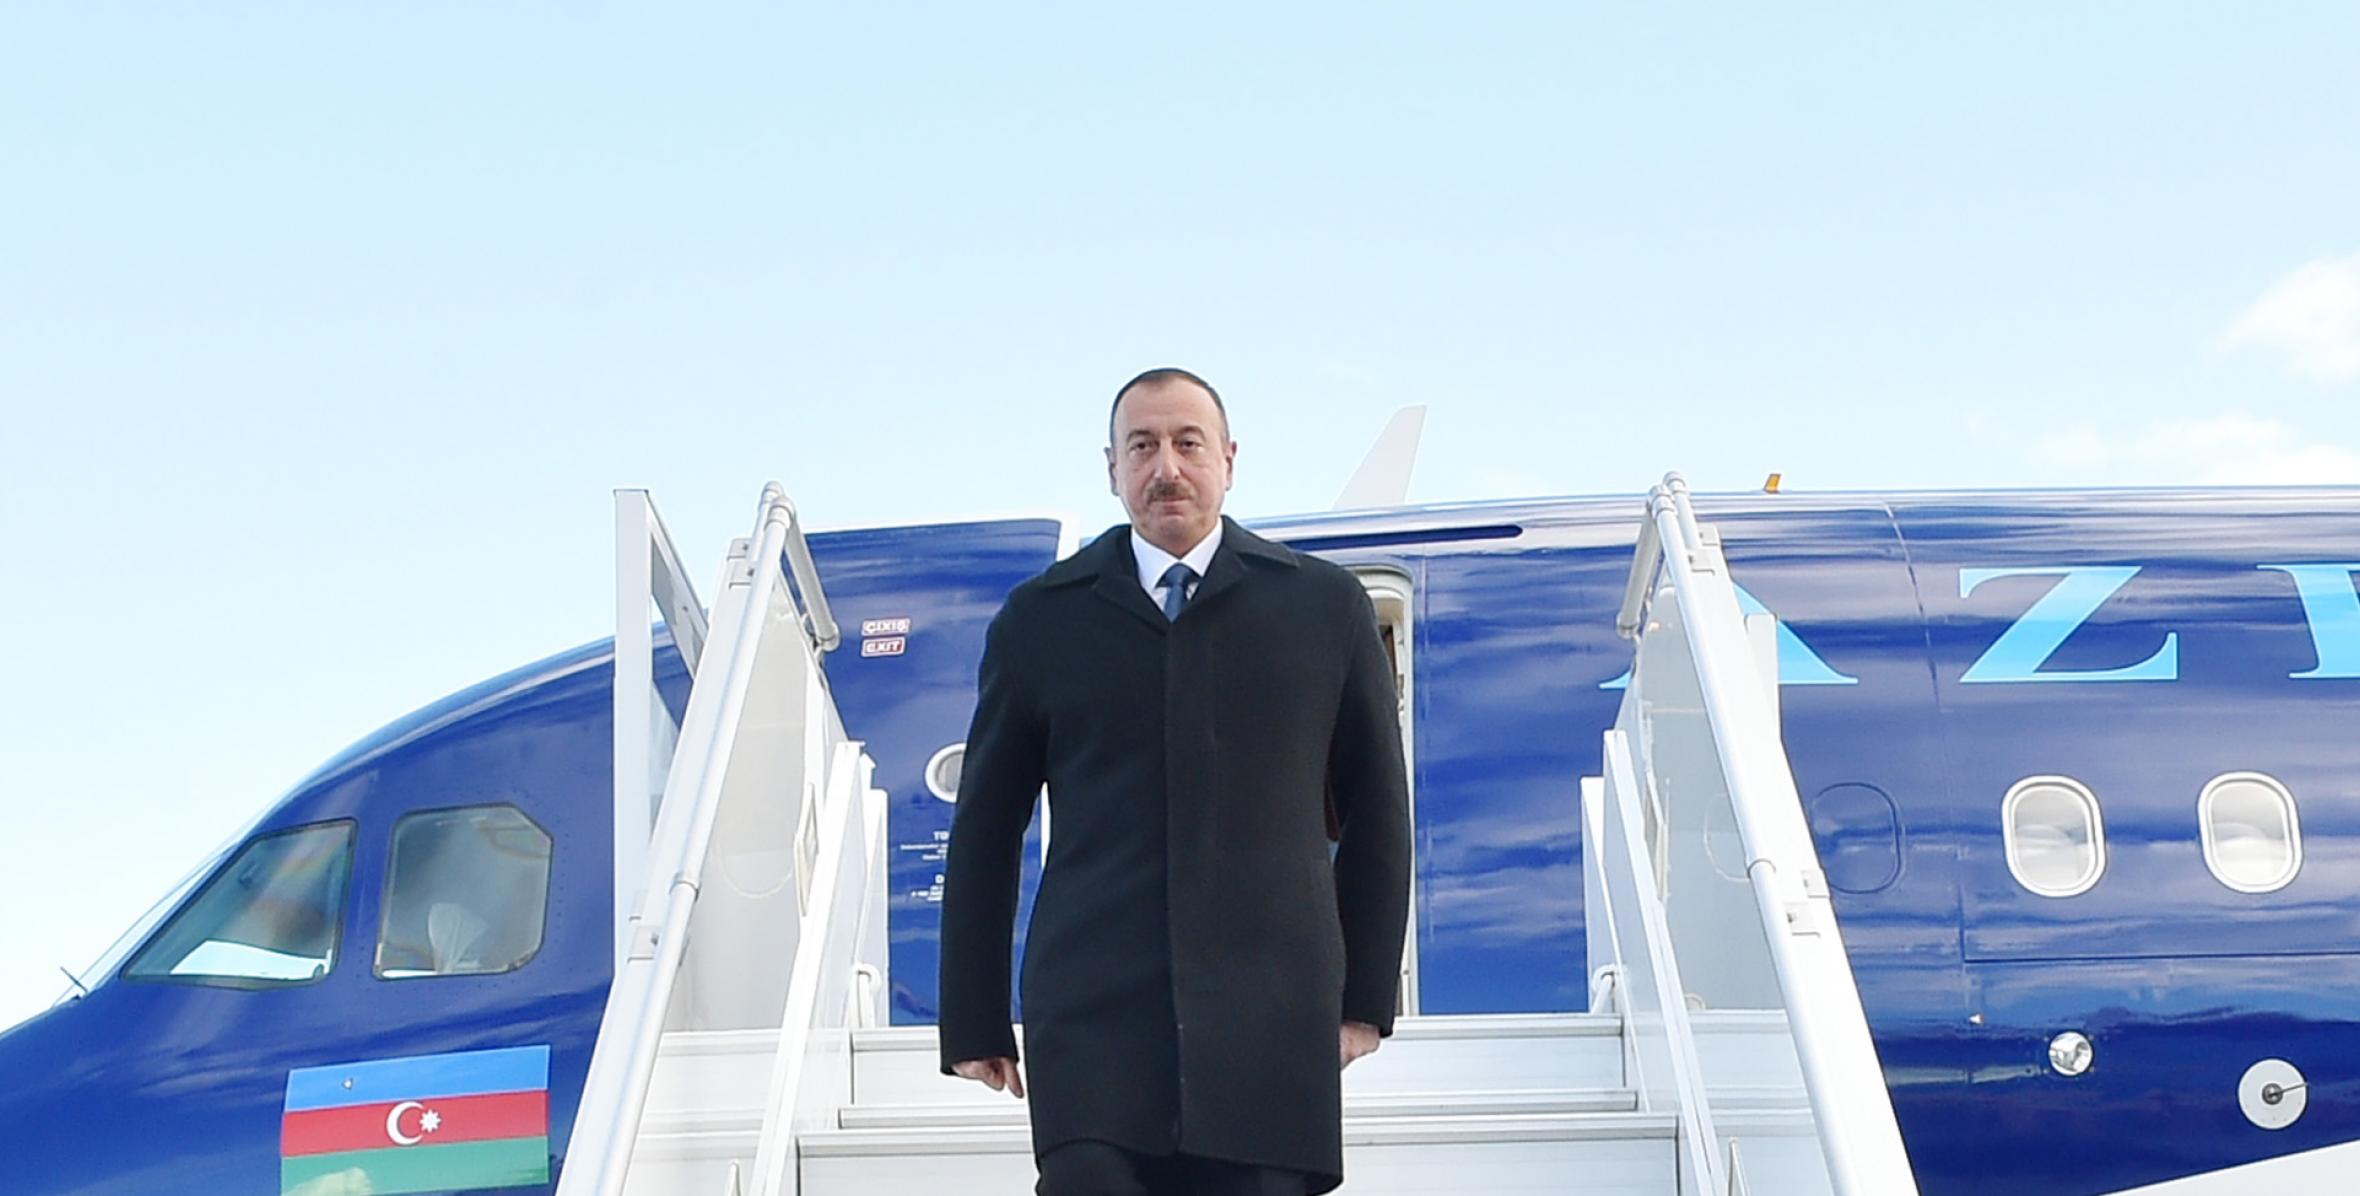 Ilham Aliyev arrived in Kazakhstan for a meeting of the Council of CIS Heads of State